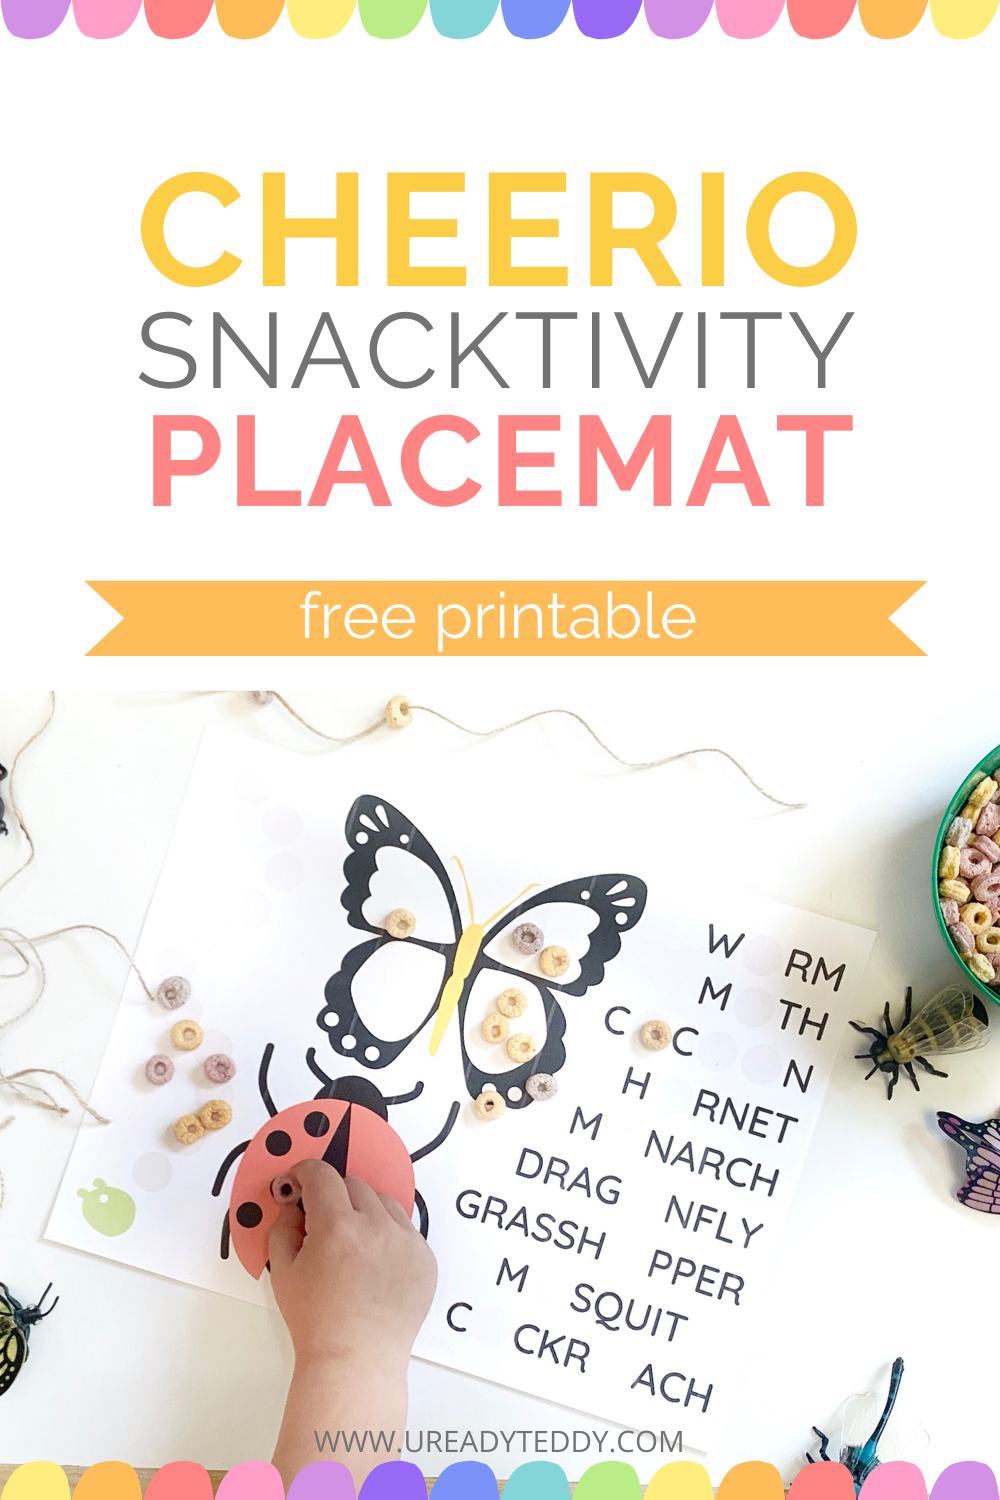 Insect + Bug Educational Placemat Activity for Cheerios Butterfly, Caterpillar, Lady Bug, Cereal Snacktivity Free Printable